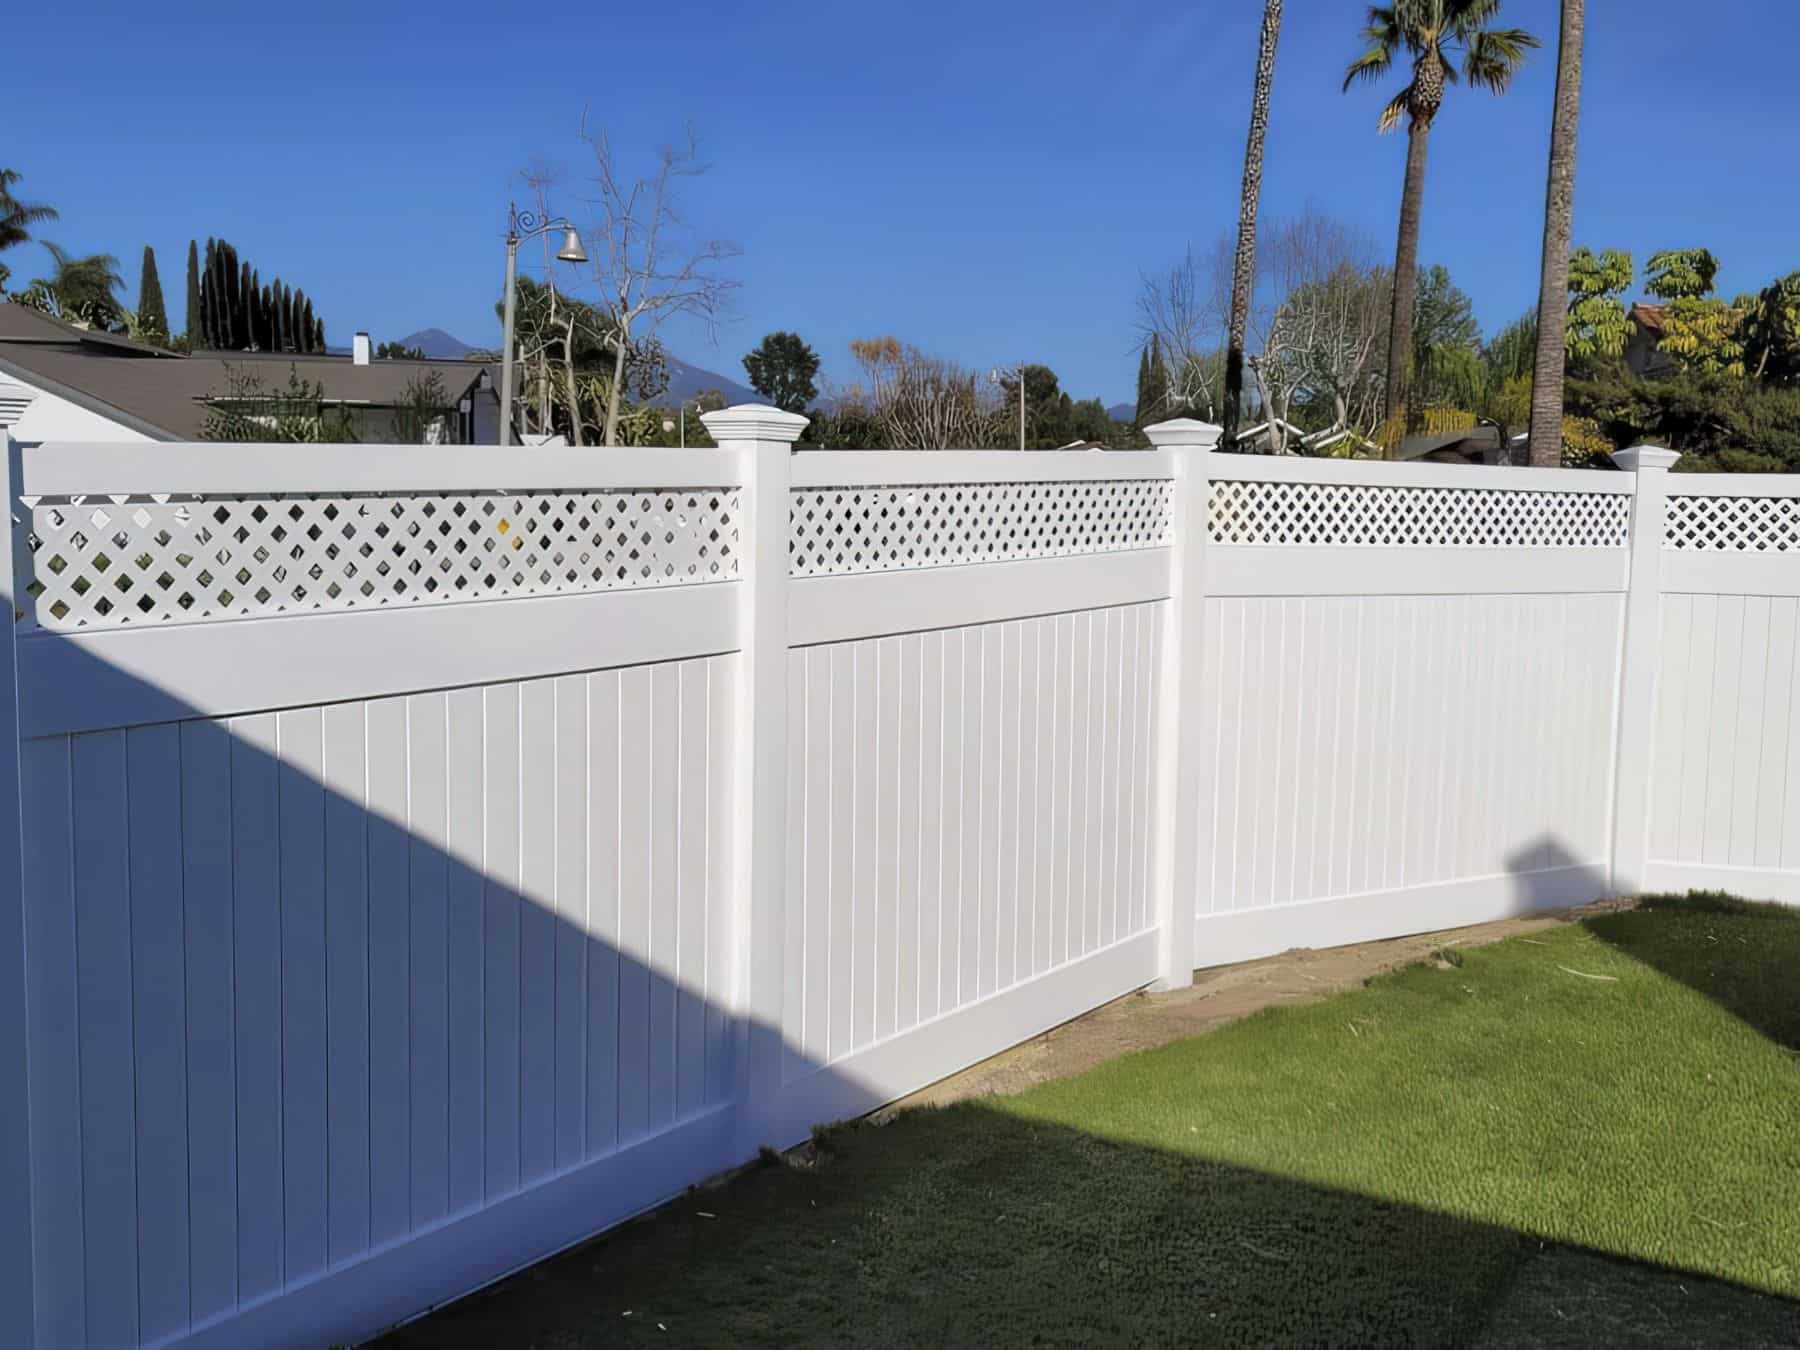 Vinyl horizontal picket fence surrounding small garden, concrete floor, lush grassy lawn, with trees in the background.